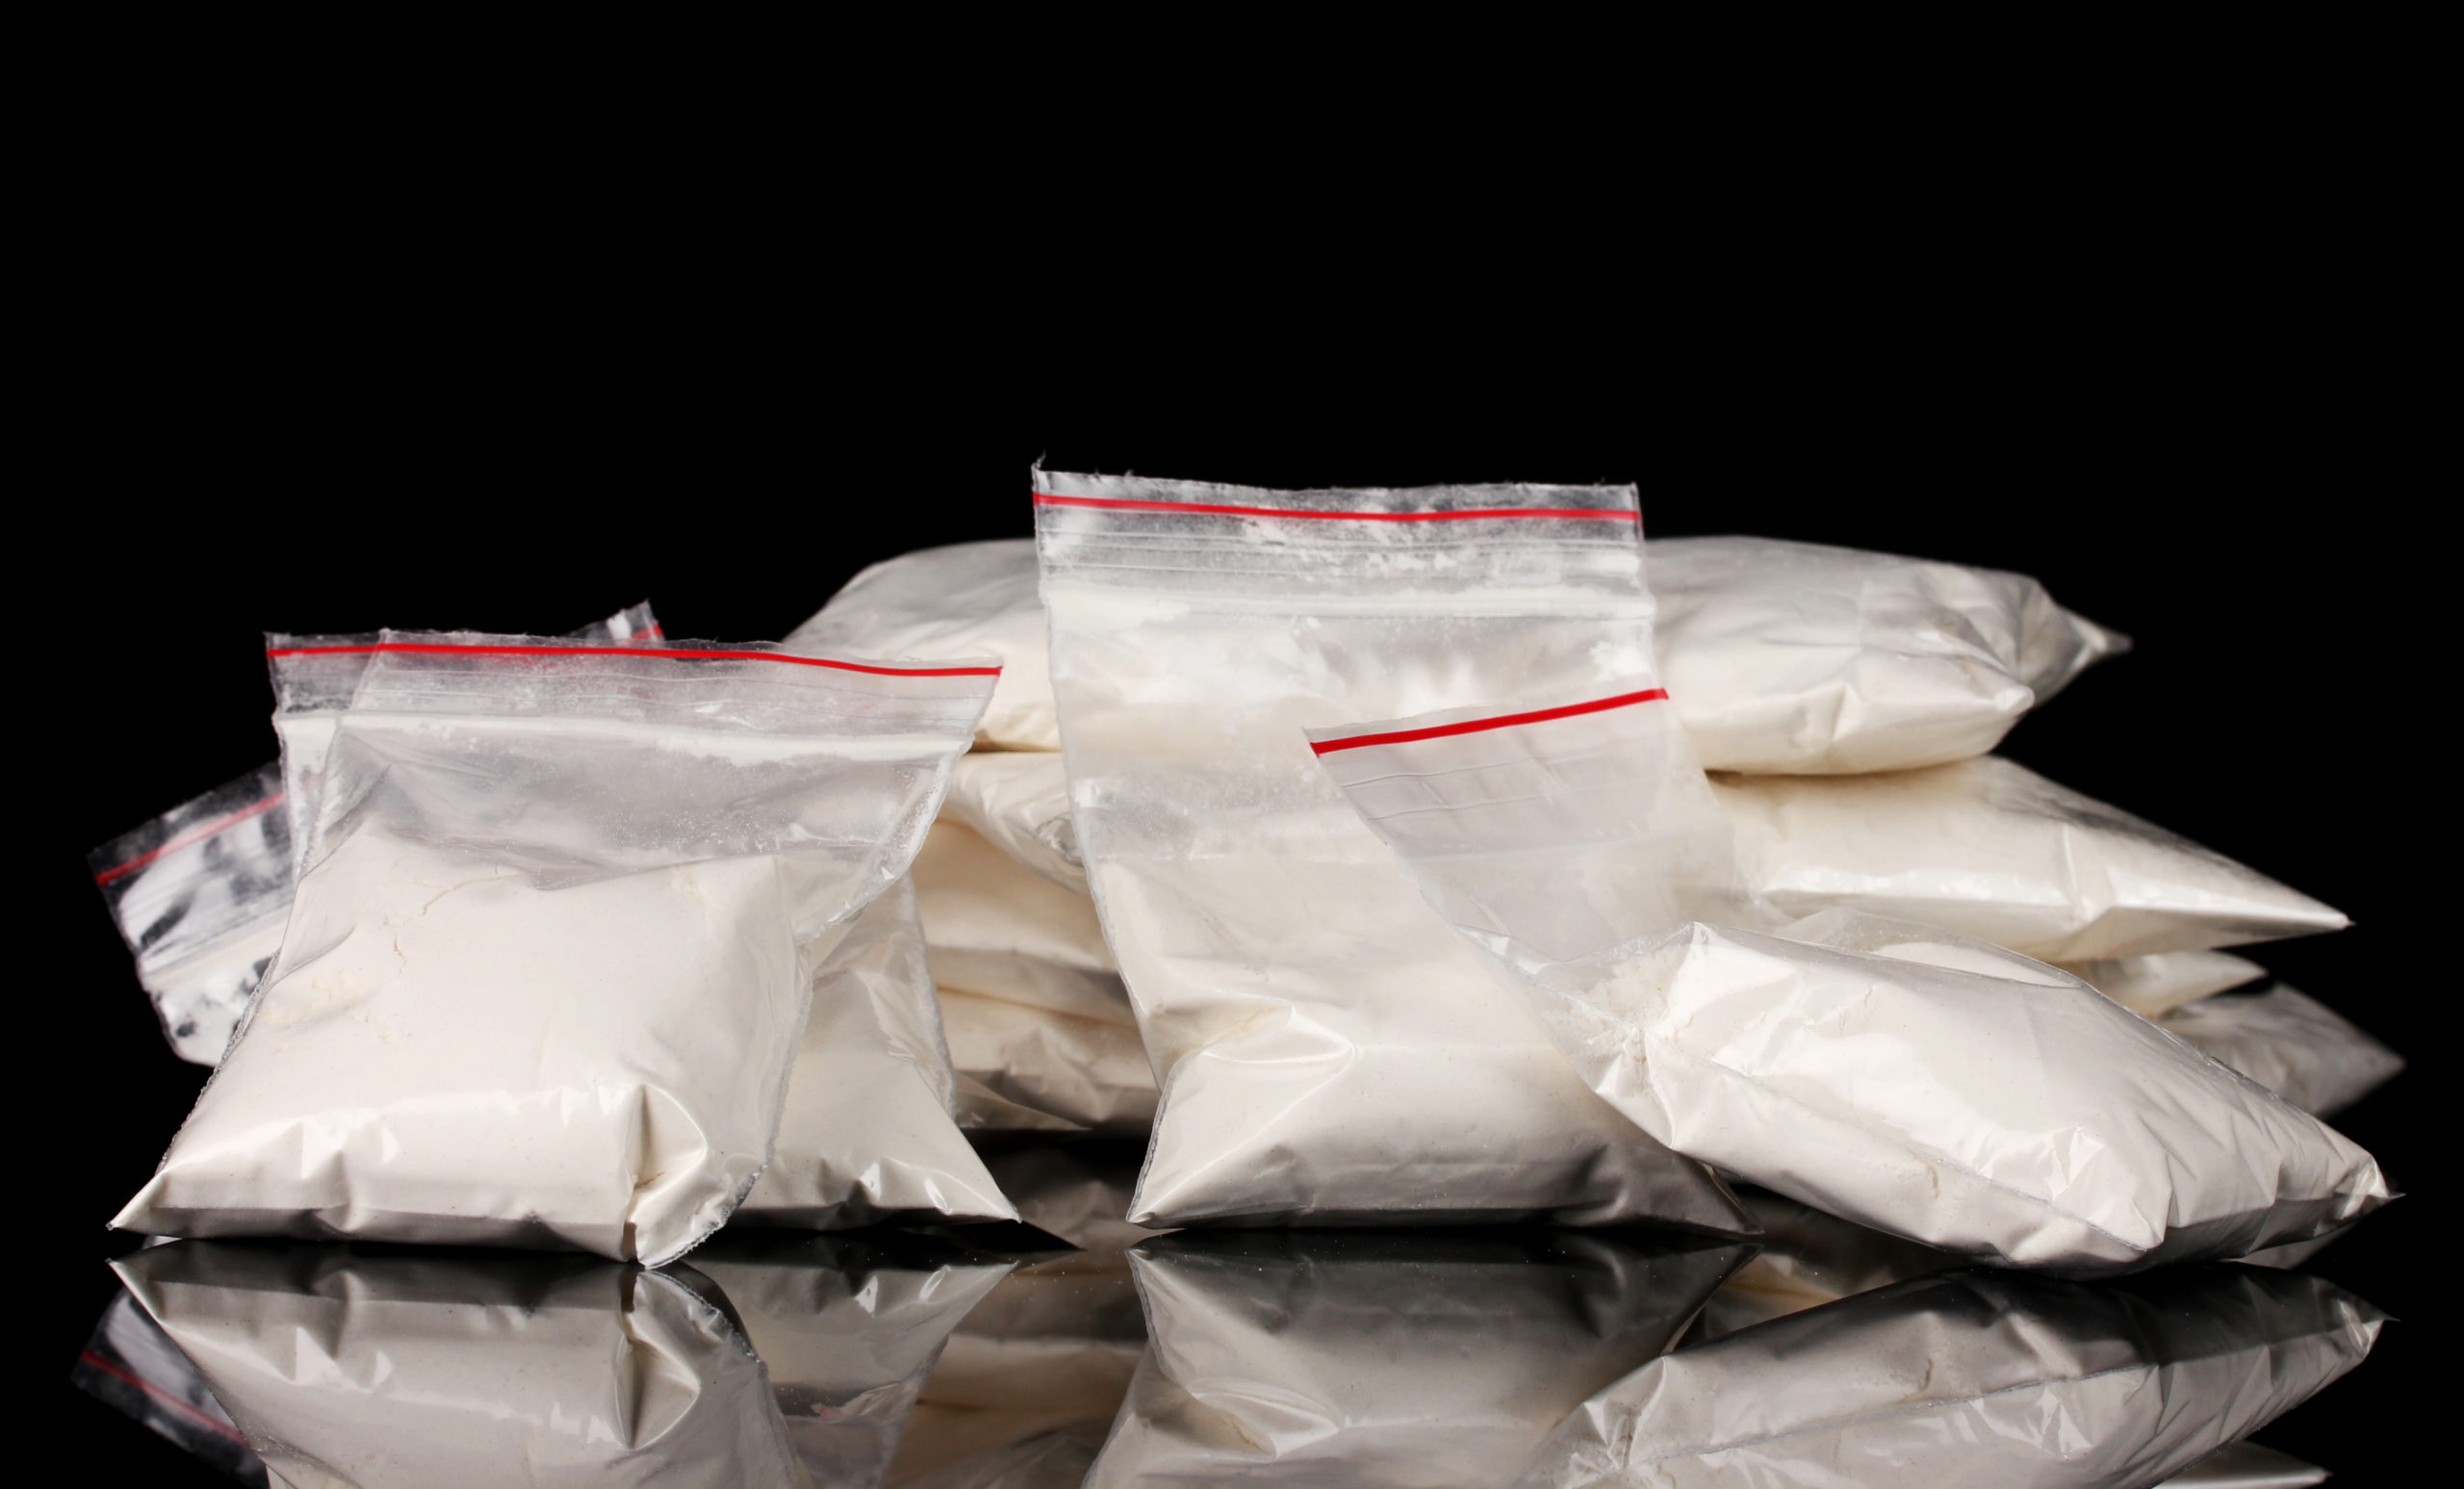 Warning Issued For Fentanyl-Laced Cocaine